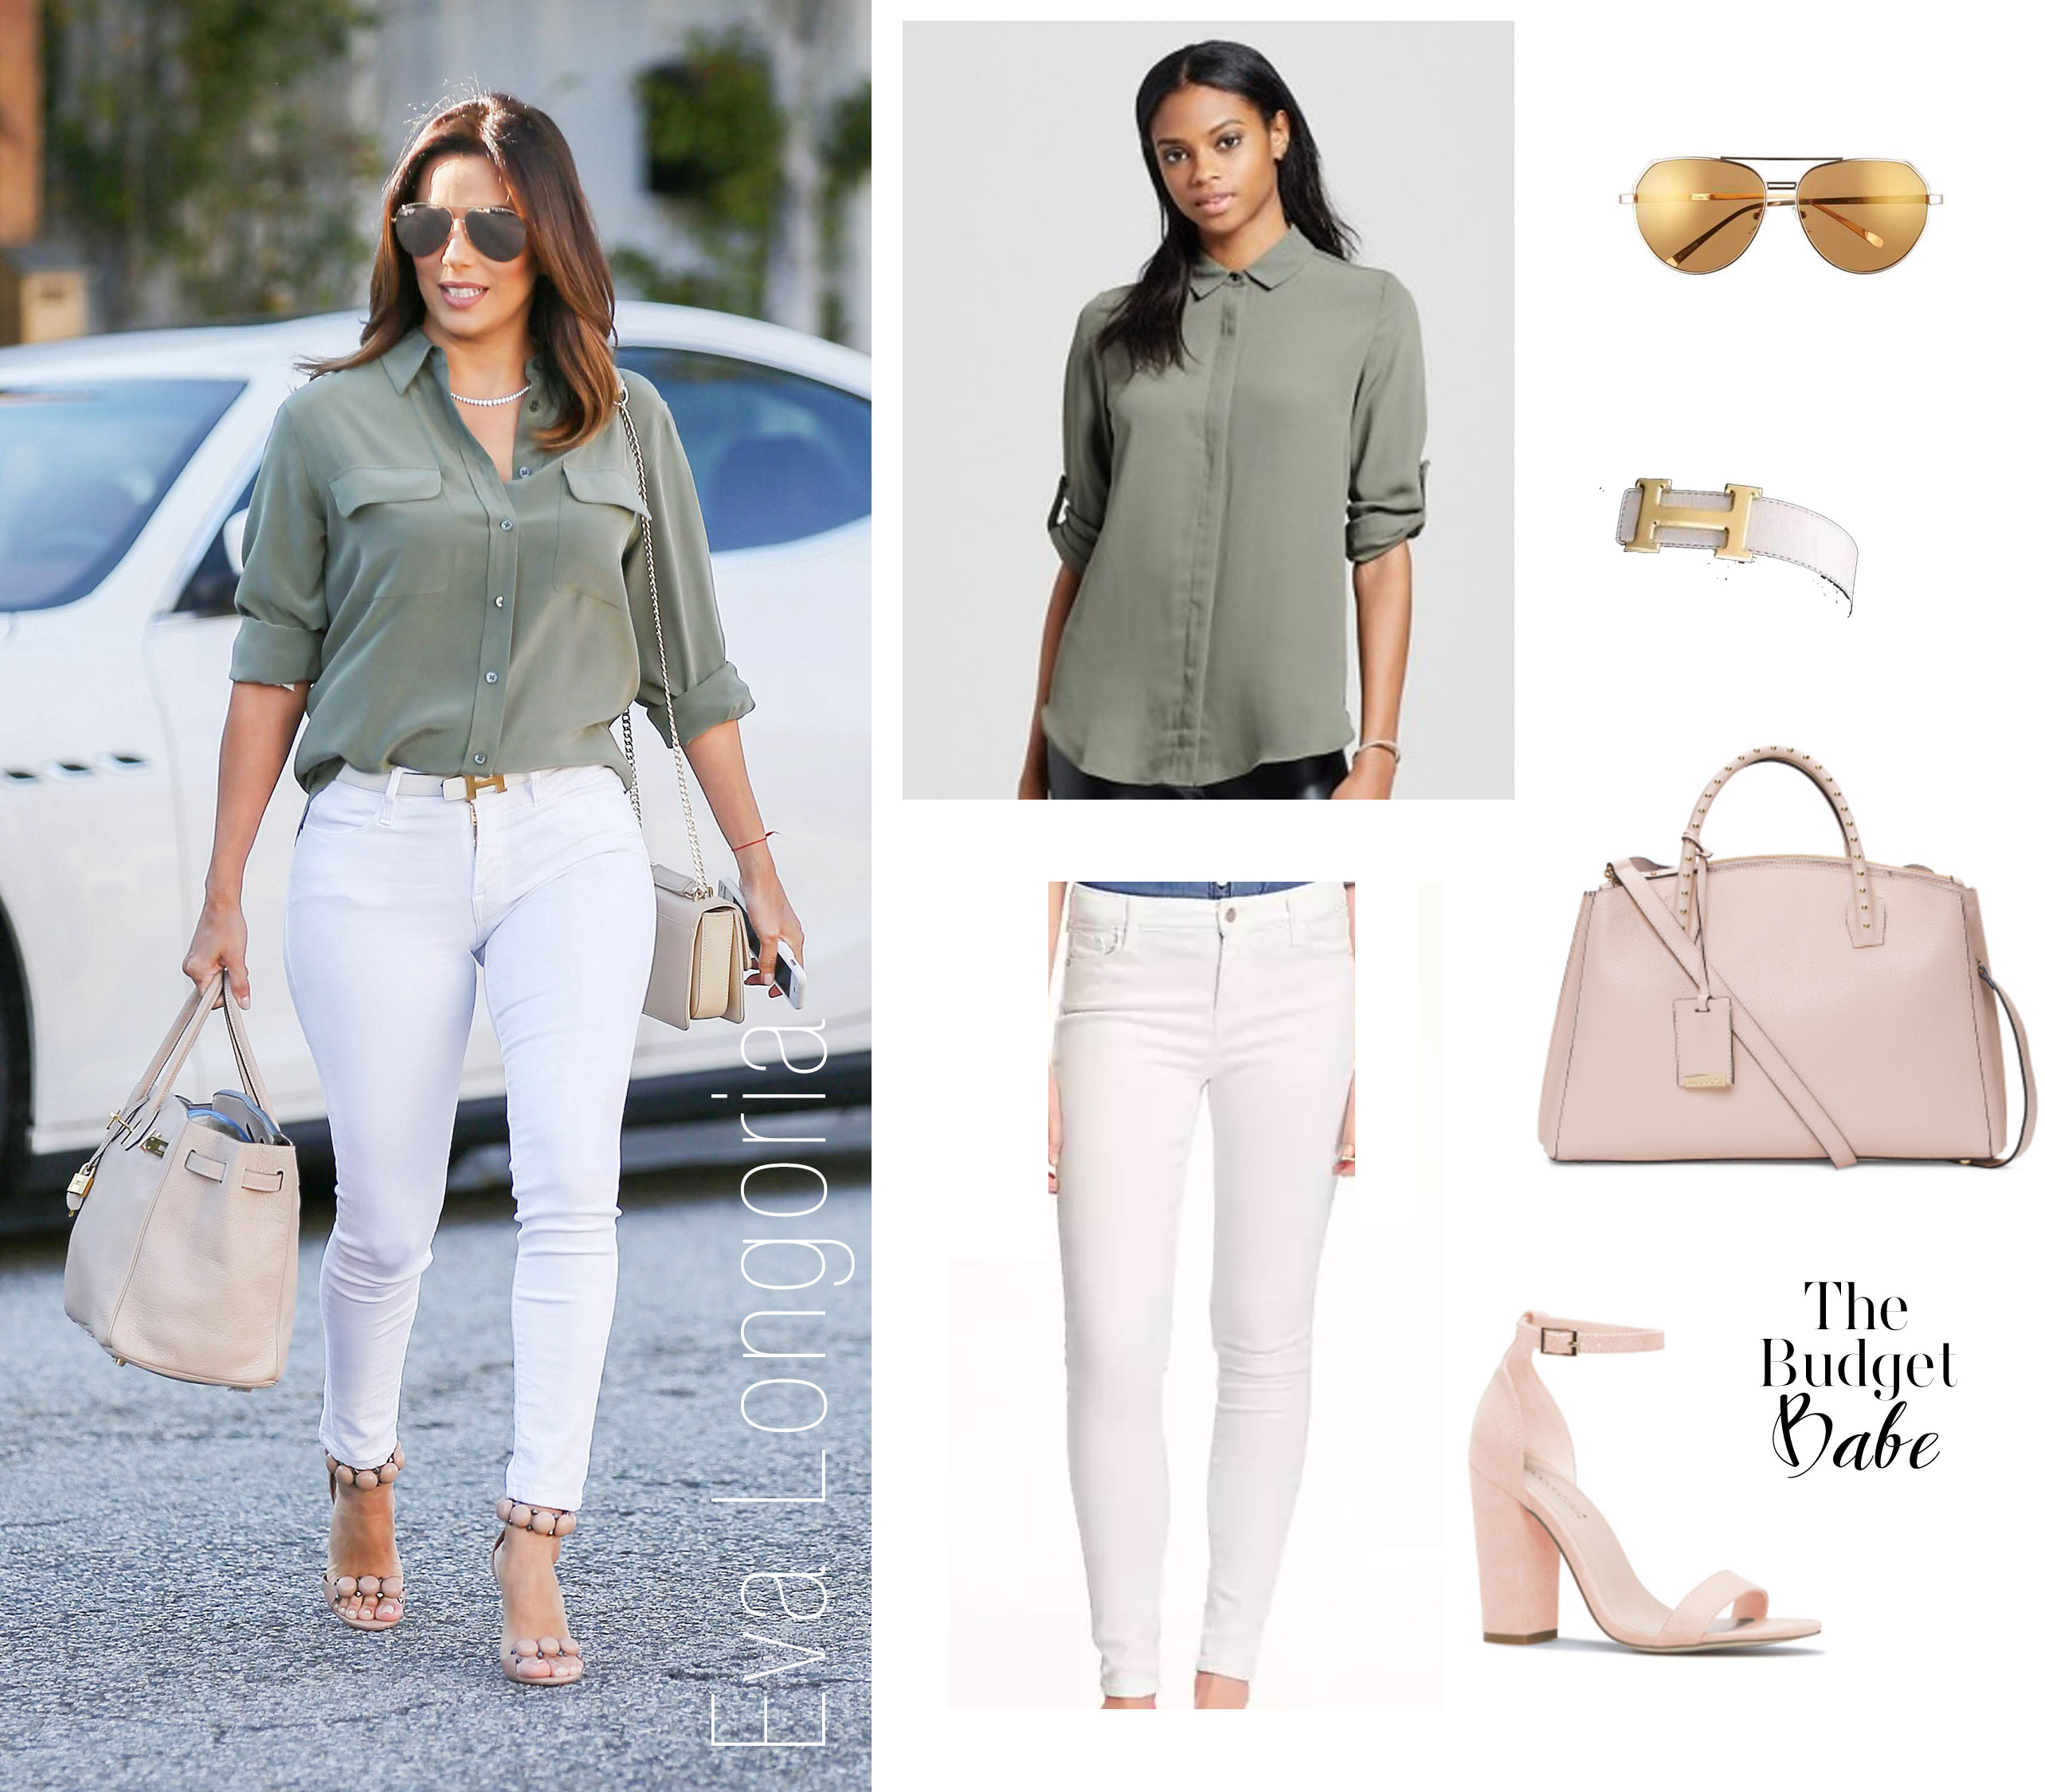 Eva Longoria looks chic in white denim and an olive blouse.